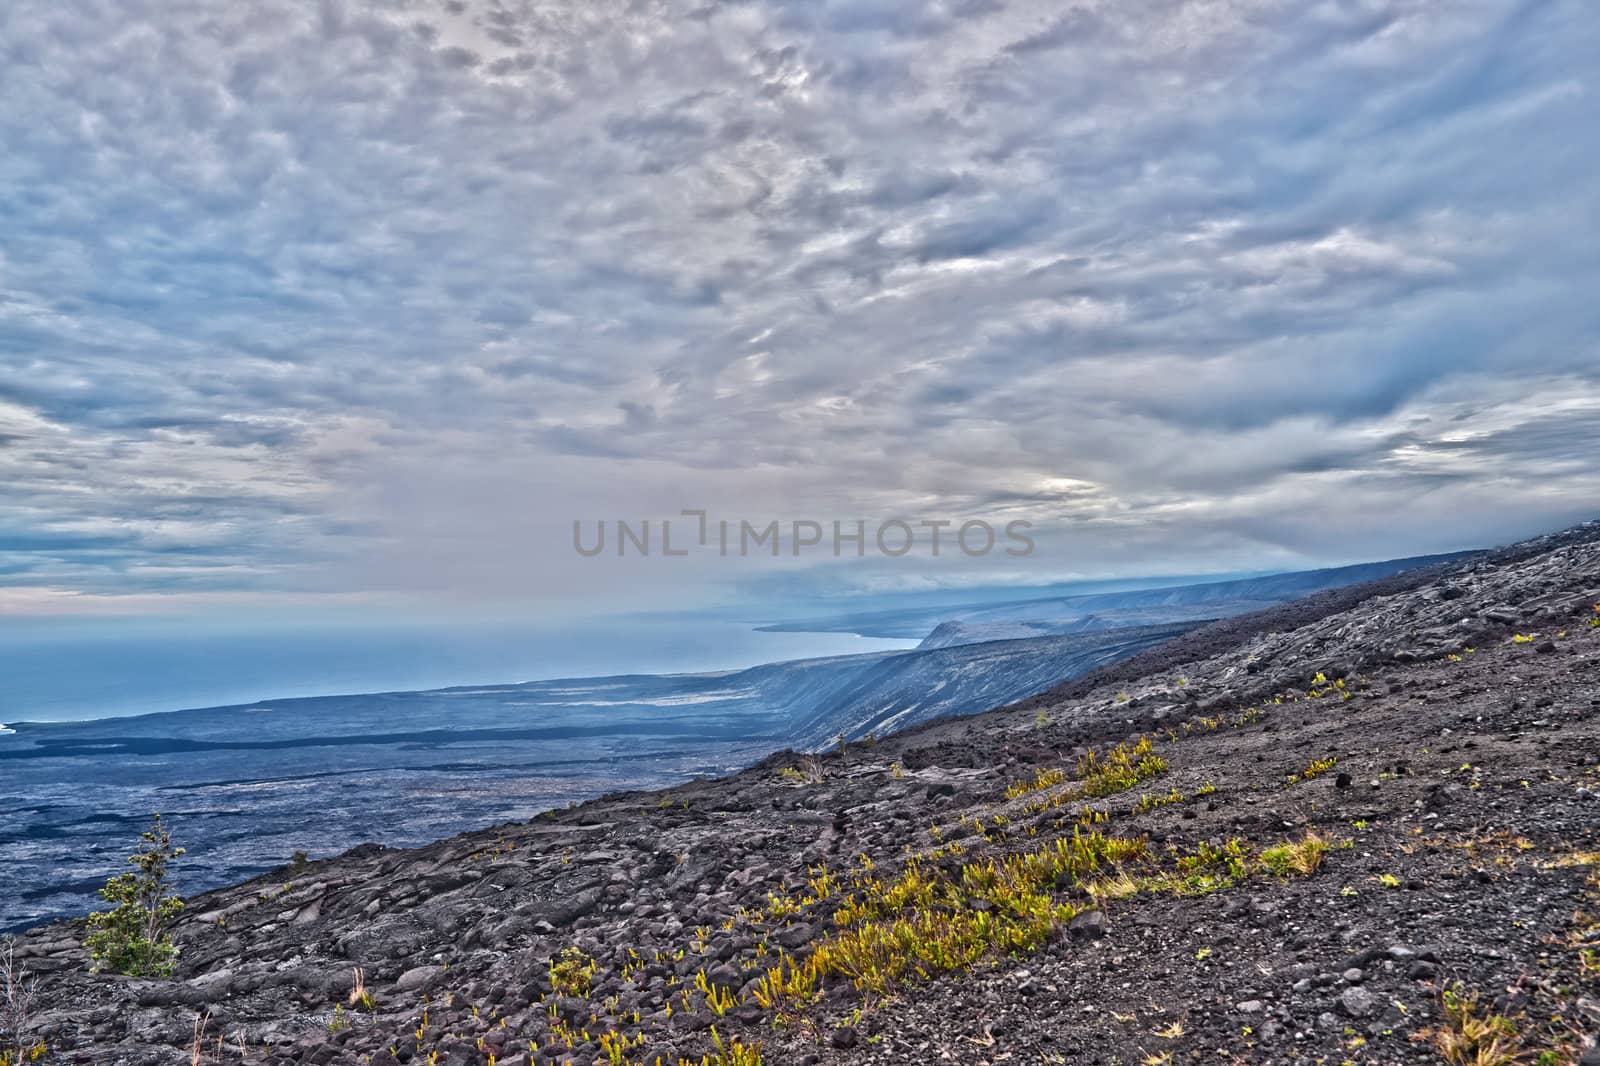 Solidified Cracked Lava Flow in Volcano, volcanic landscape when driving Chain of craters road in Big Island Hawaii. HDR image.